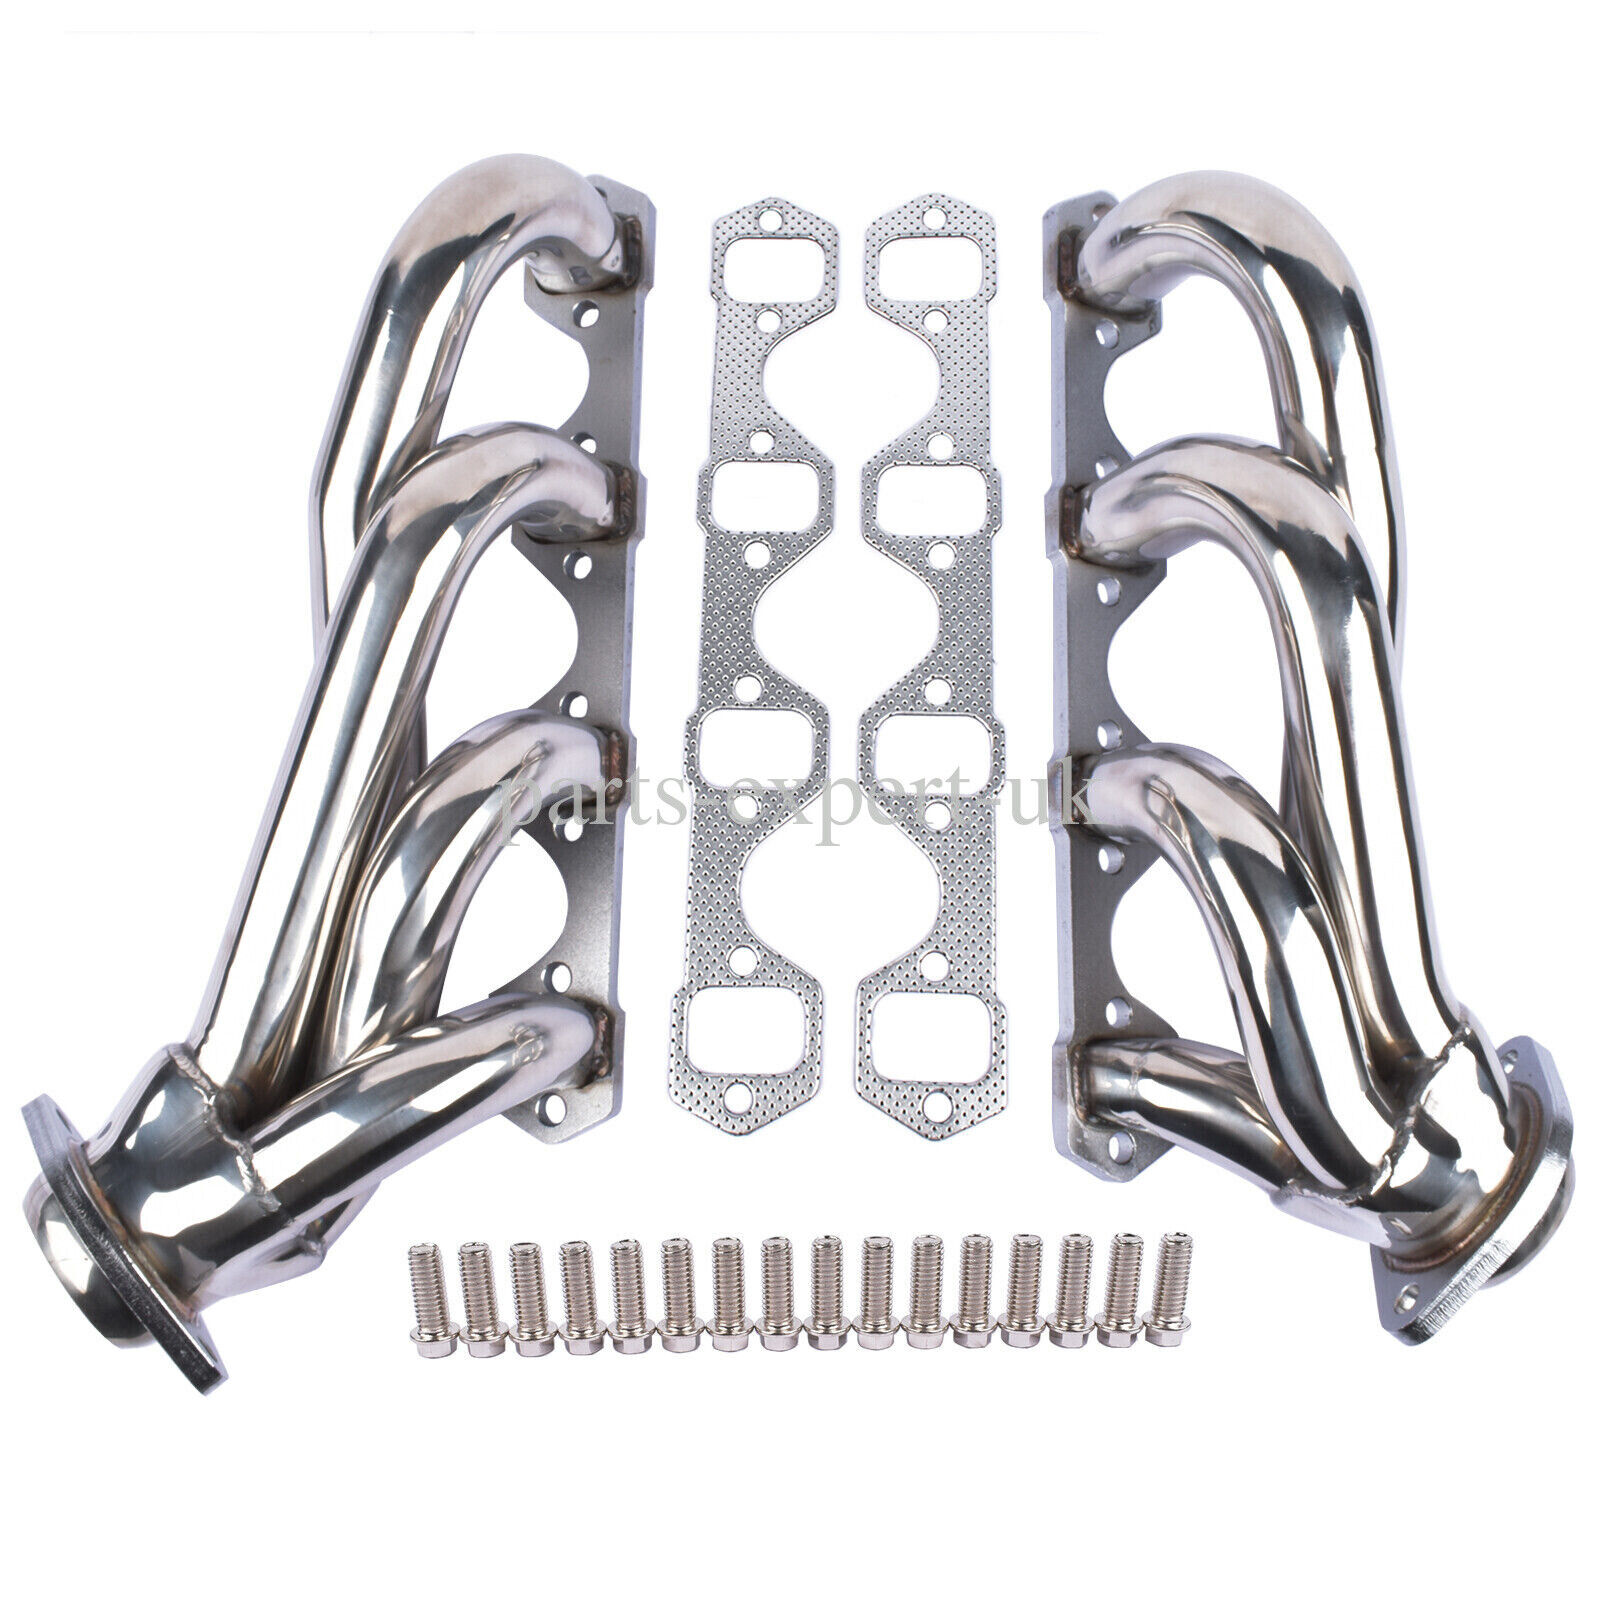 Stainless Manifold Header w/Gaskets for Ford Mustang 5.0 V8 GT LX SVT 1979-1993